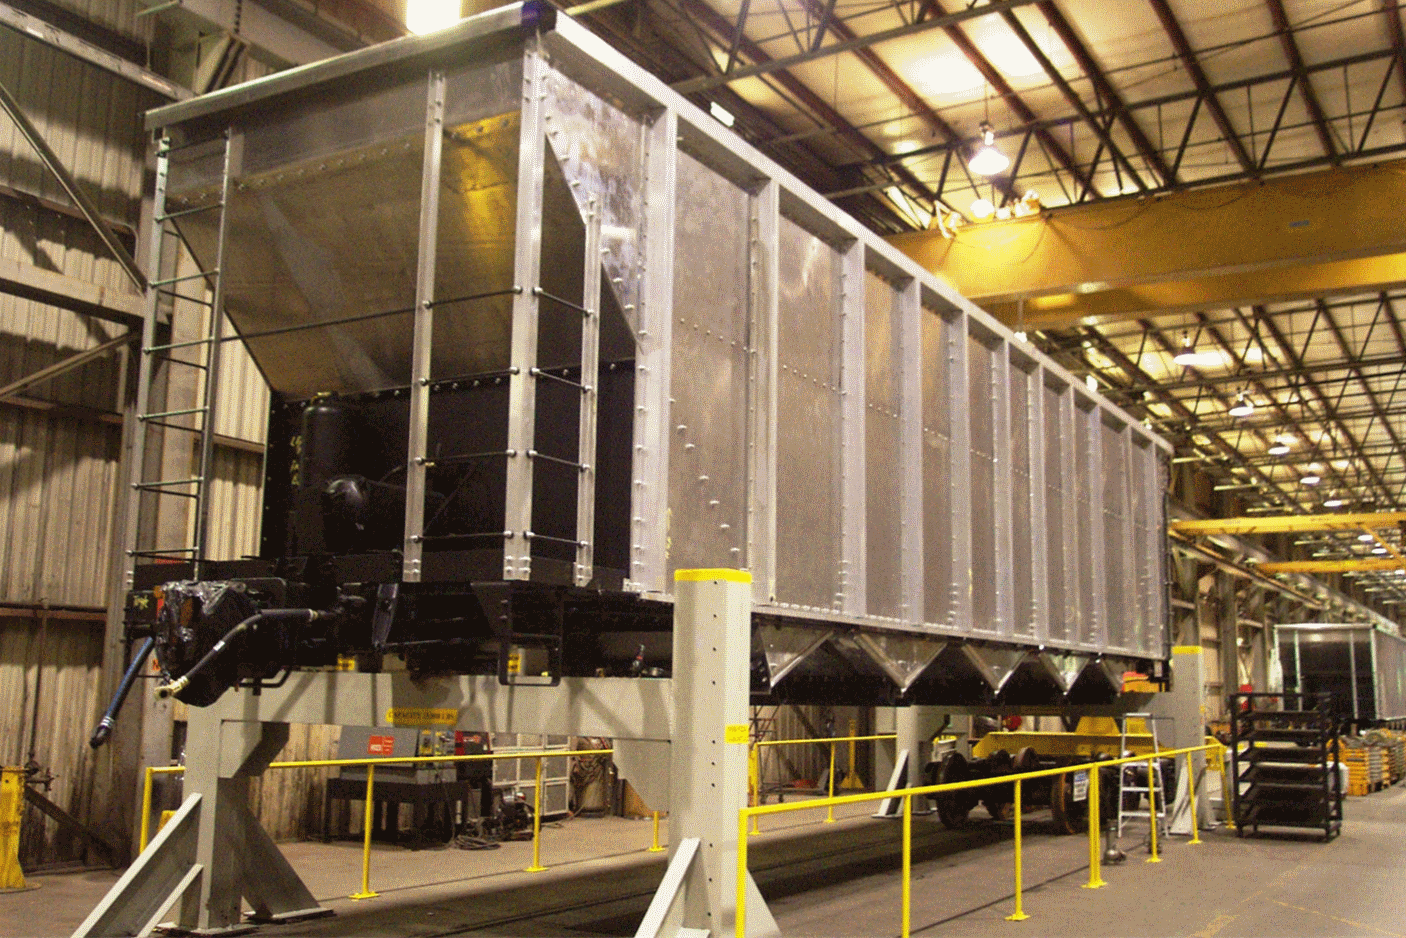 Four-bay hopper in production